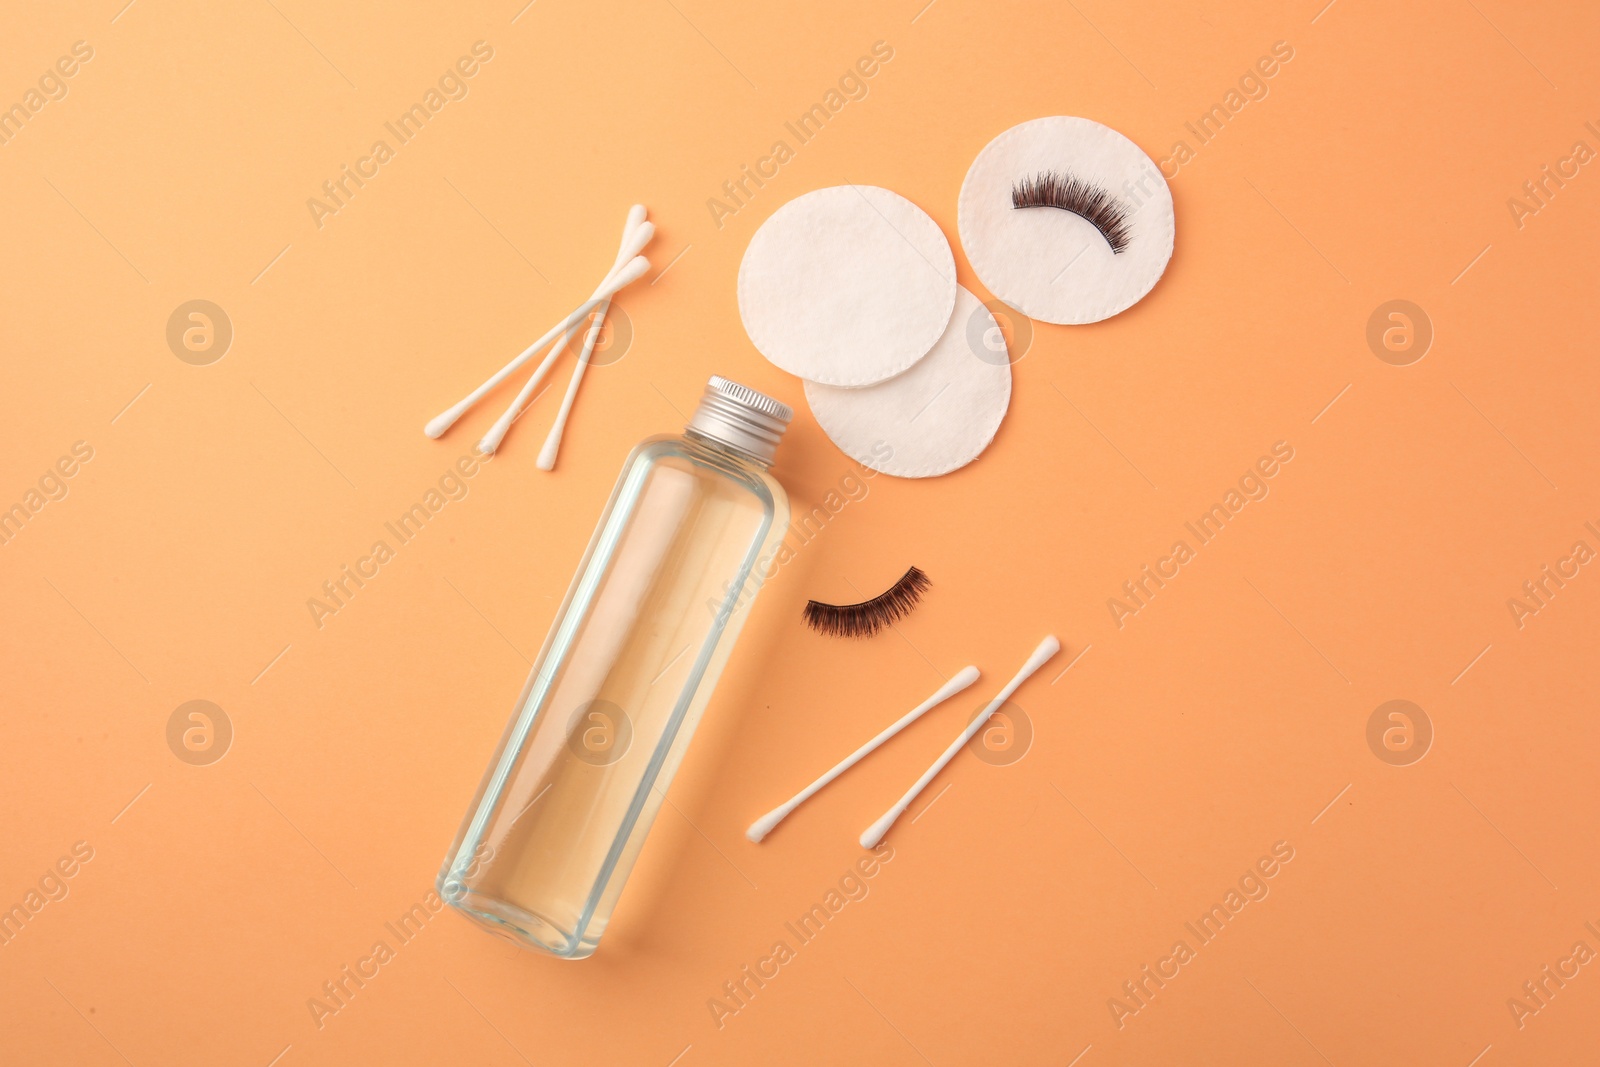 Photo of Flat lay composition with makeup remover and false eyelashes on pale orange background